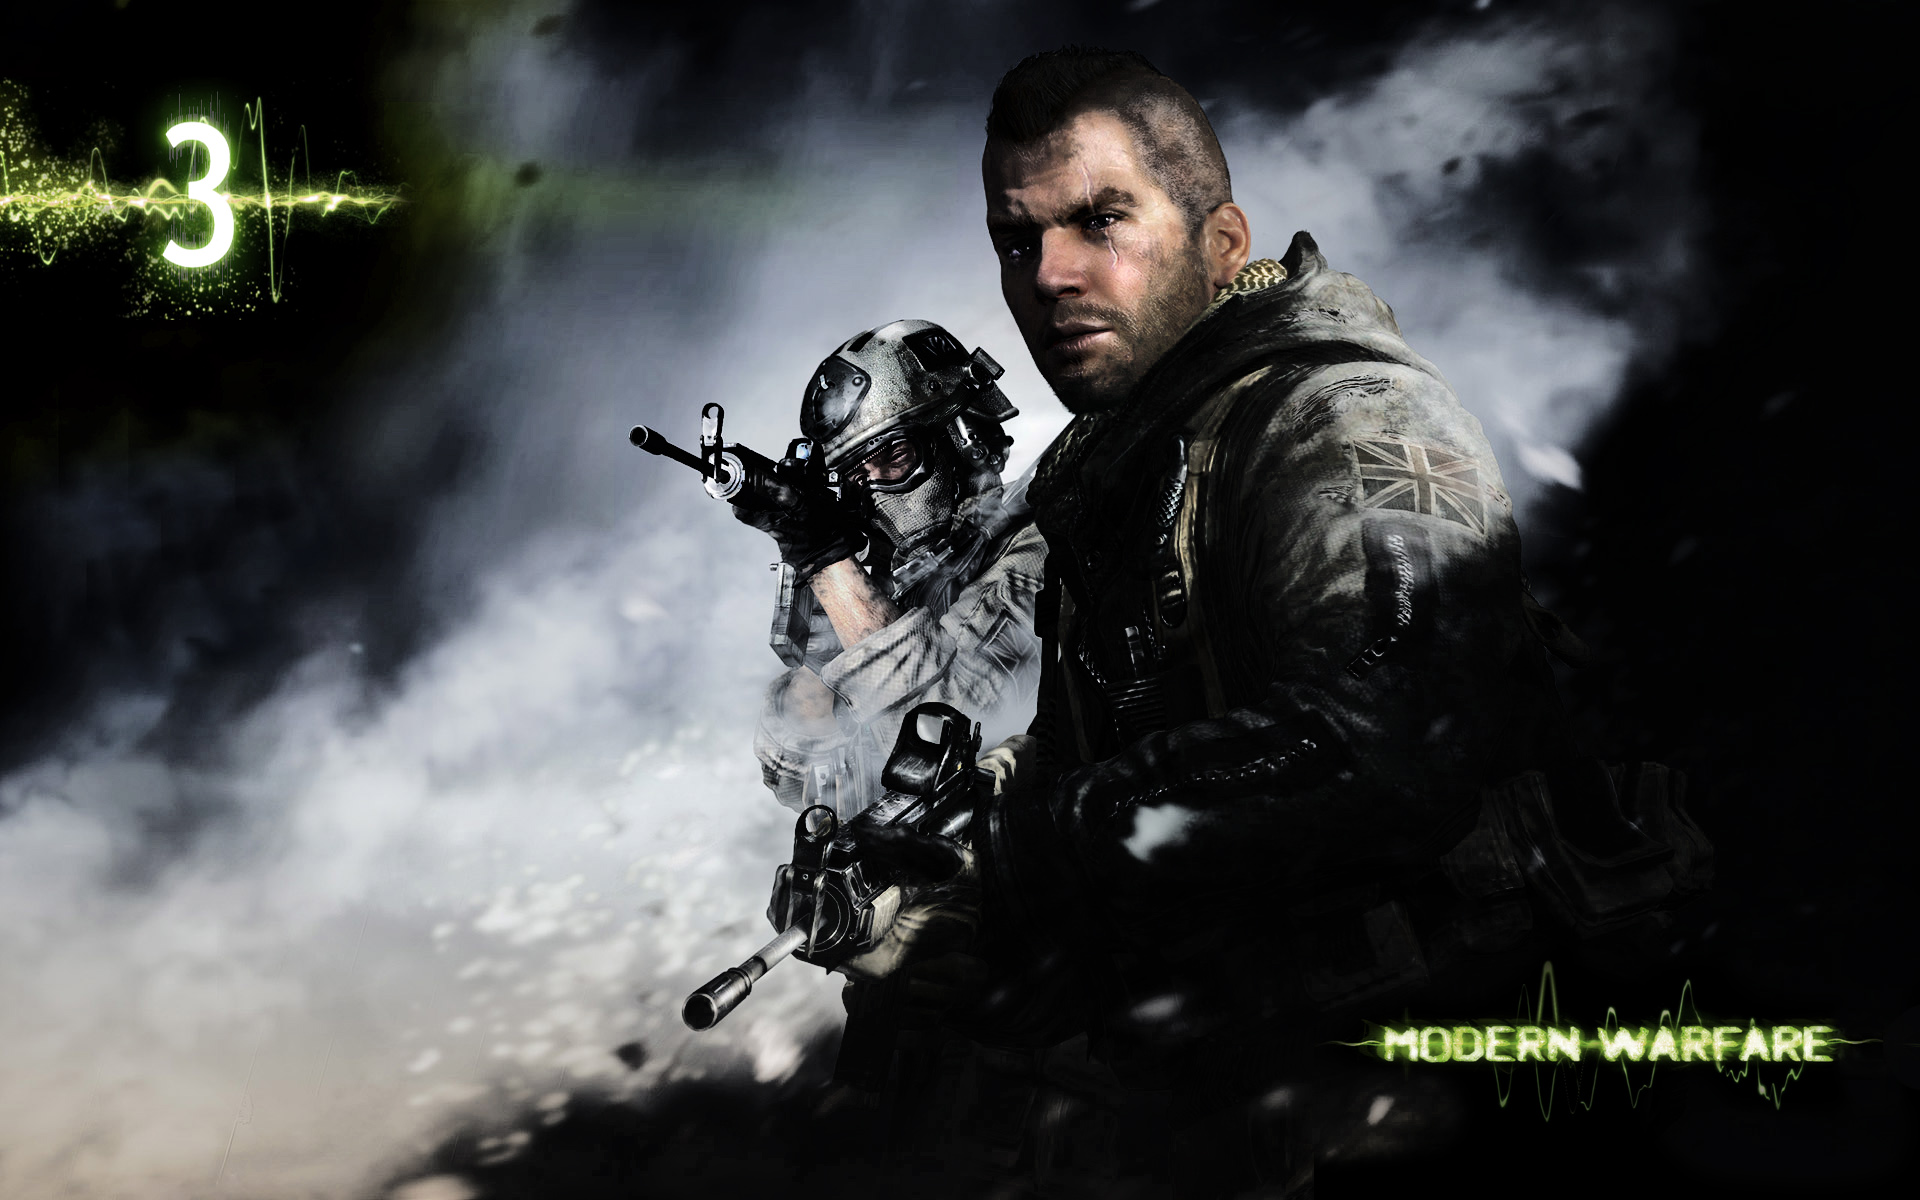 call of duty wallpaper hd,movie,soldier,games,digital compositing,shooter game